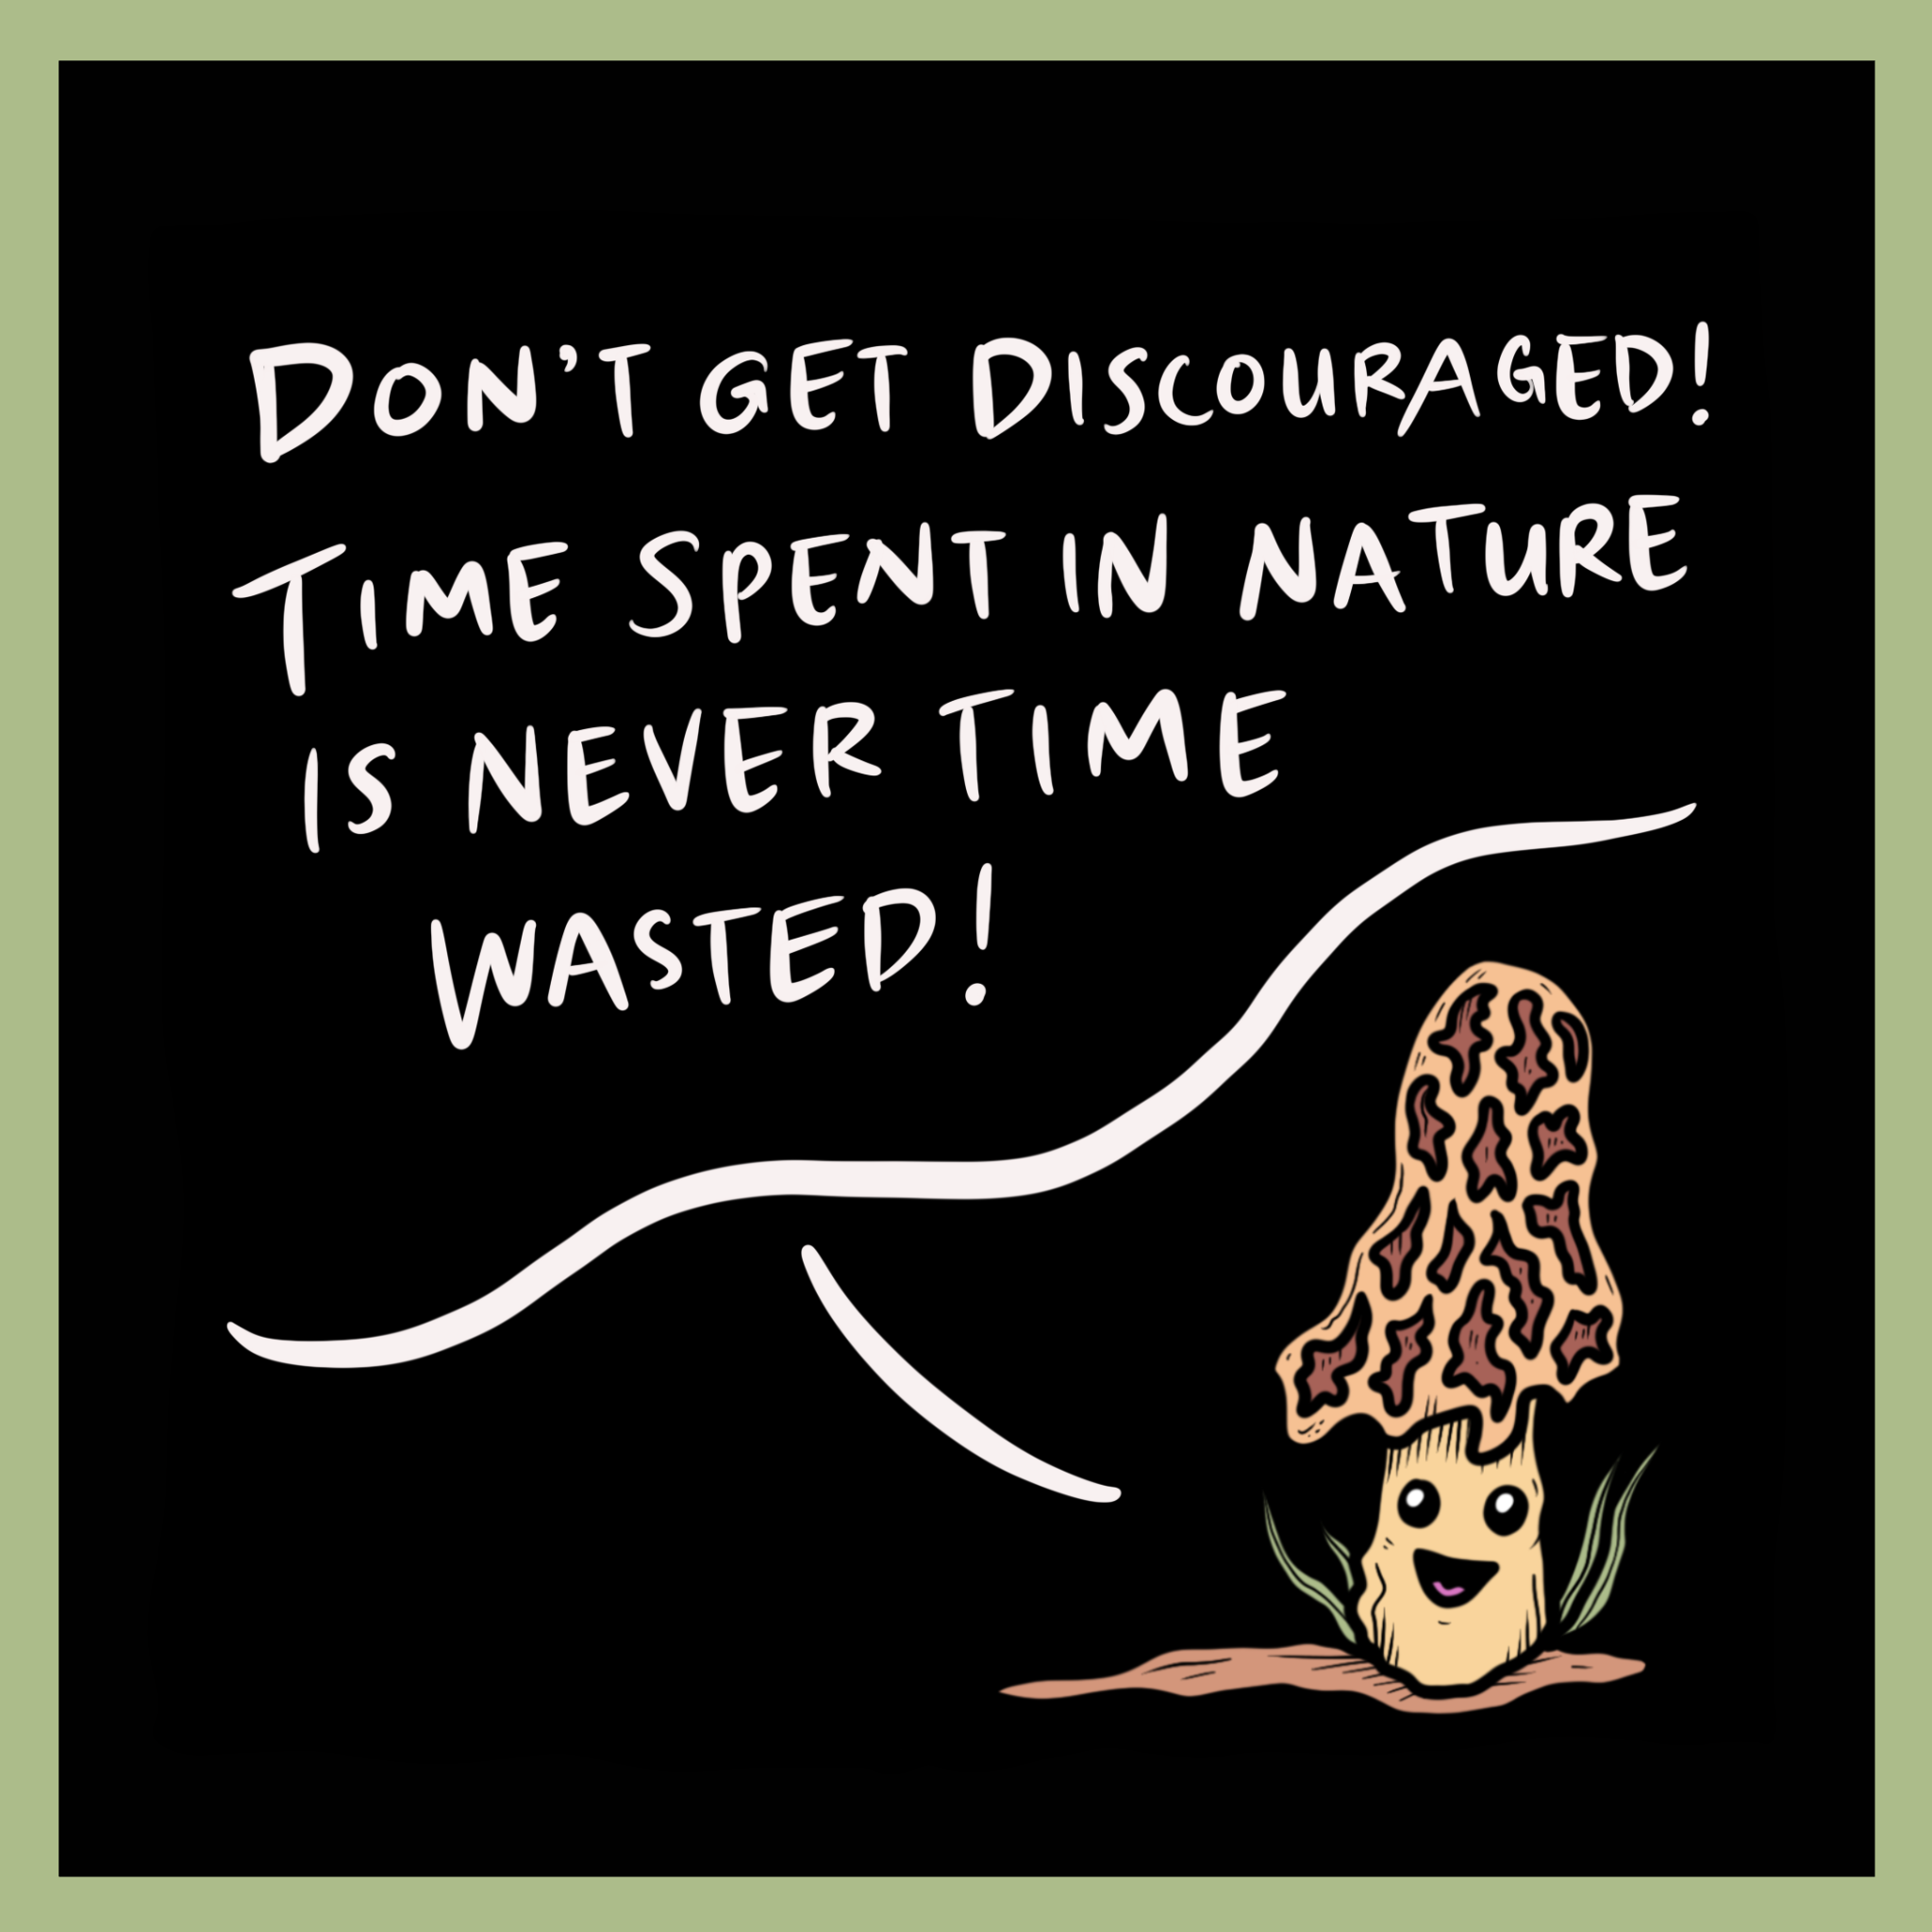 Don't get discouraged! Time spent in nature is never time wasted!